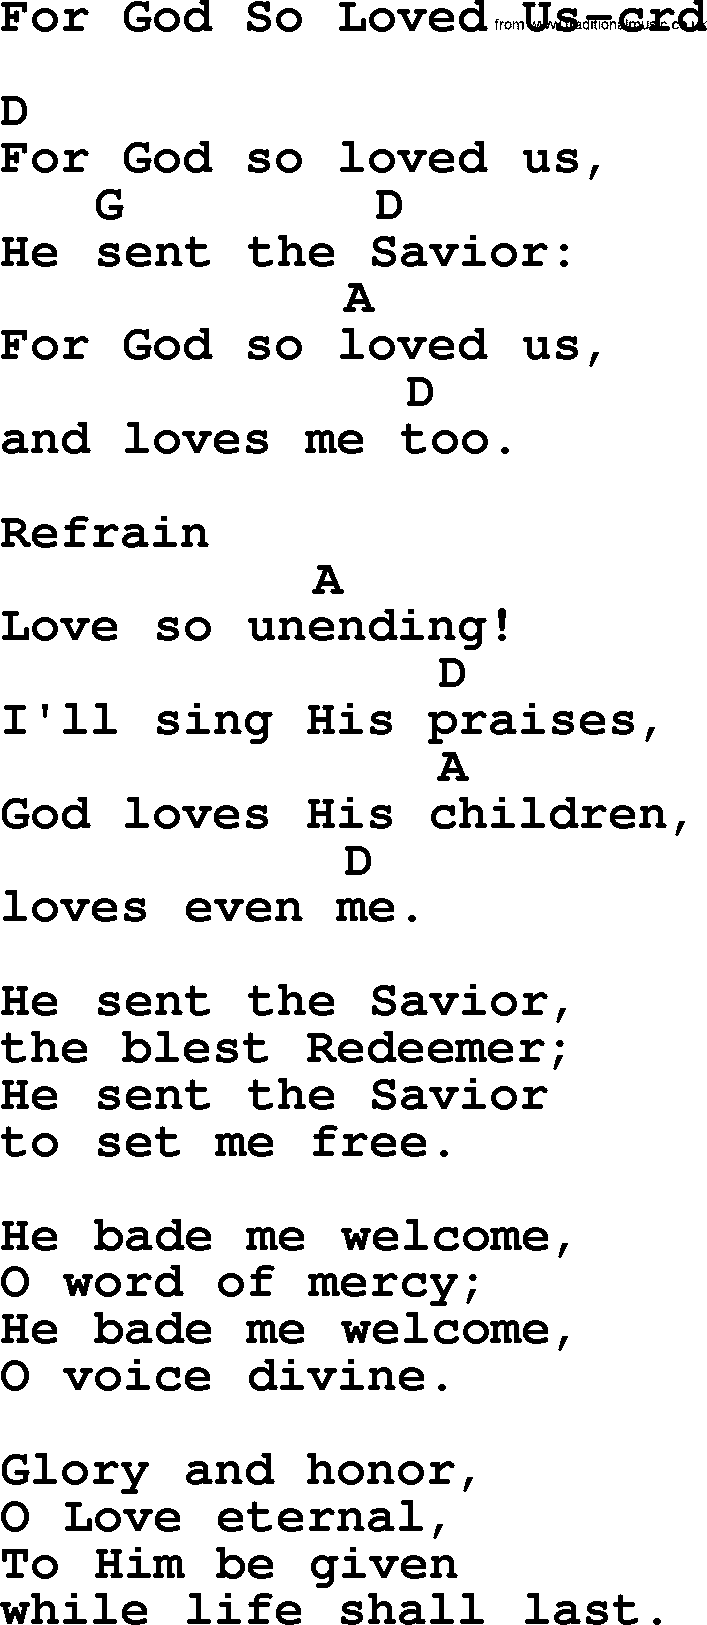 Top 500 Hymn: For God So Loved Us, lyrics and chords